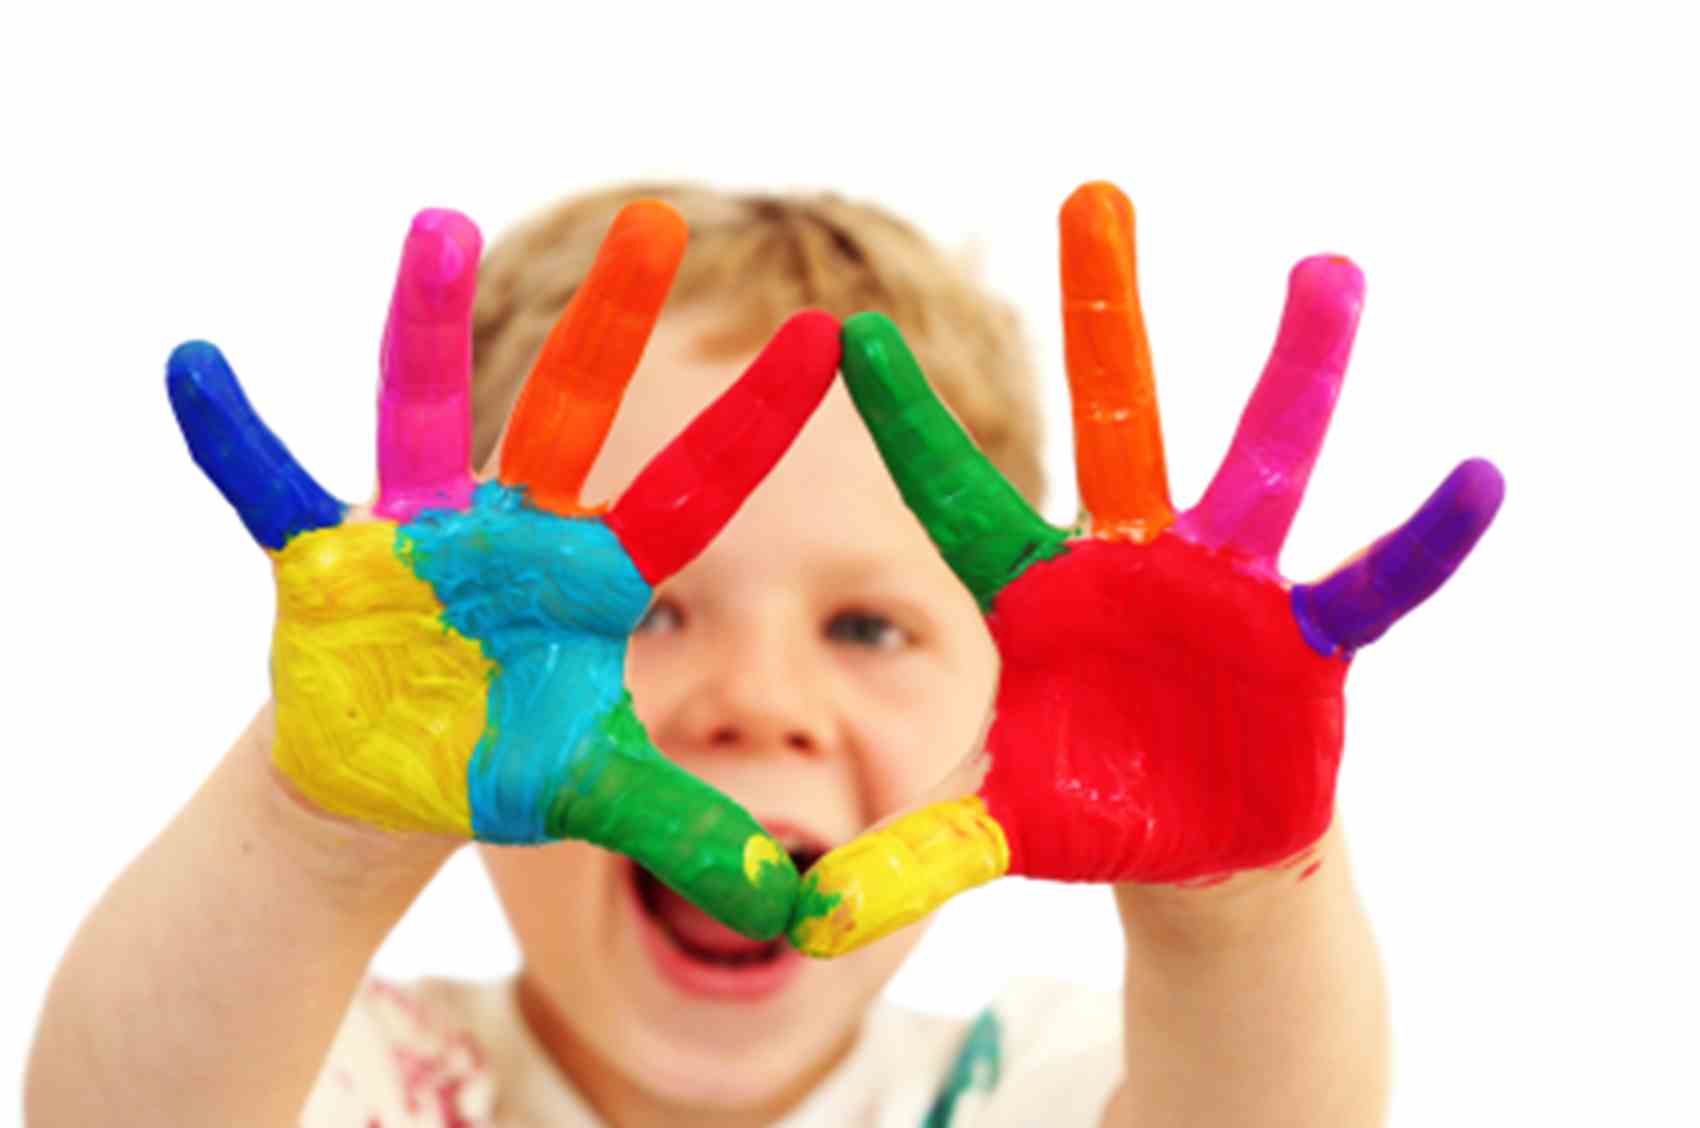 Child painted hands.jpg